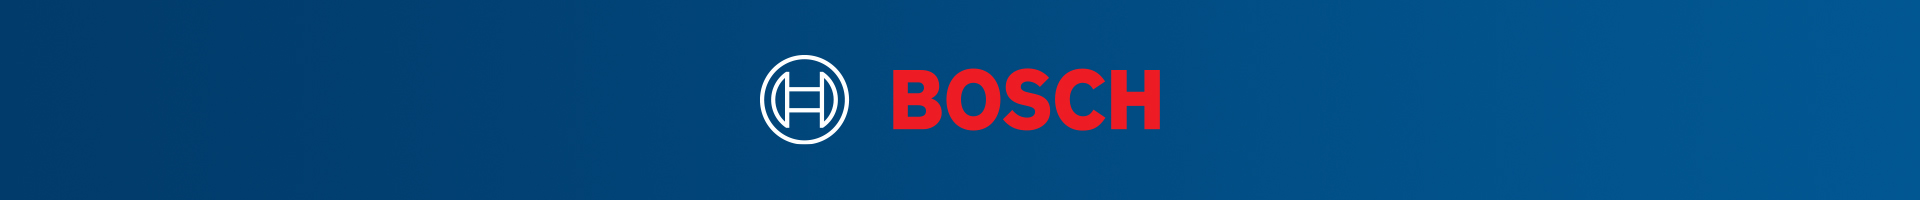 What's new from Bosch!